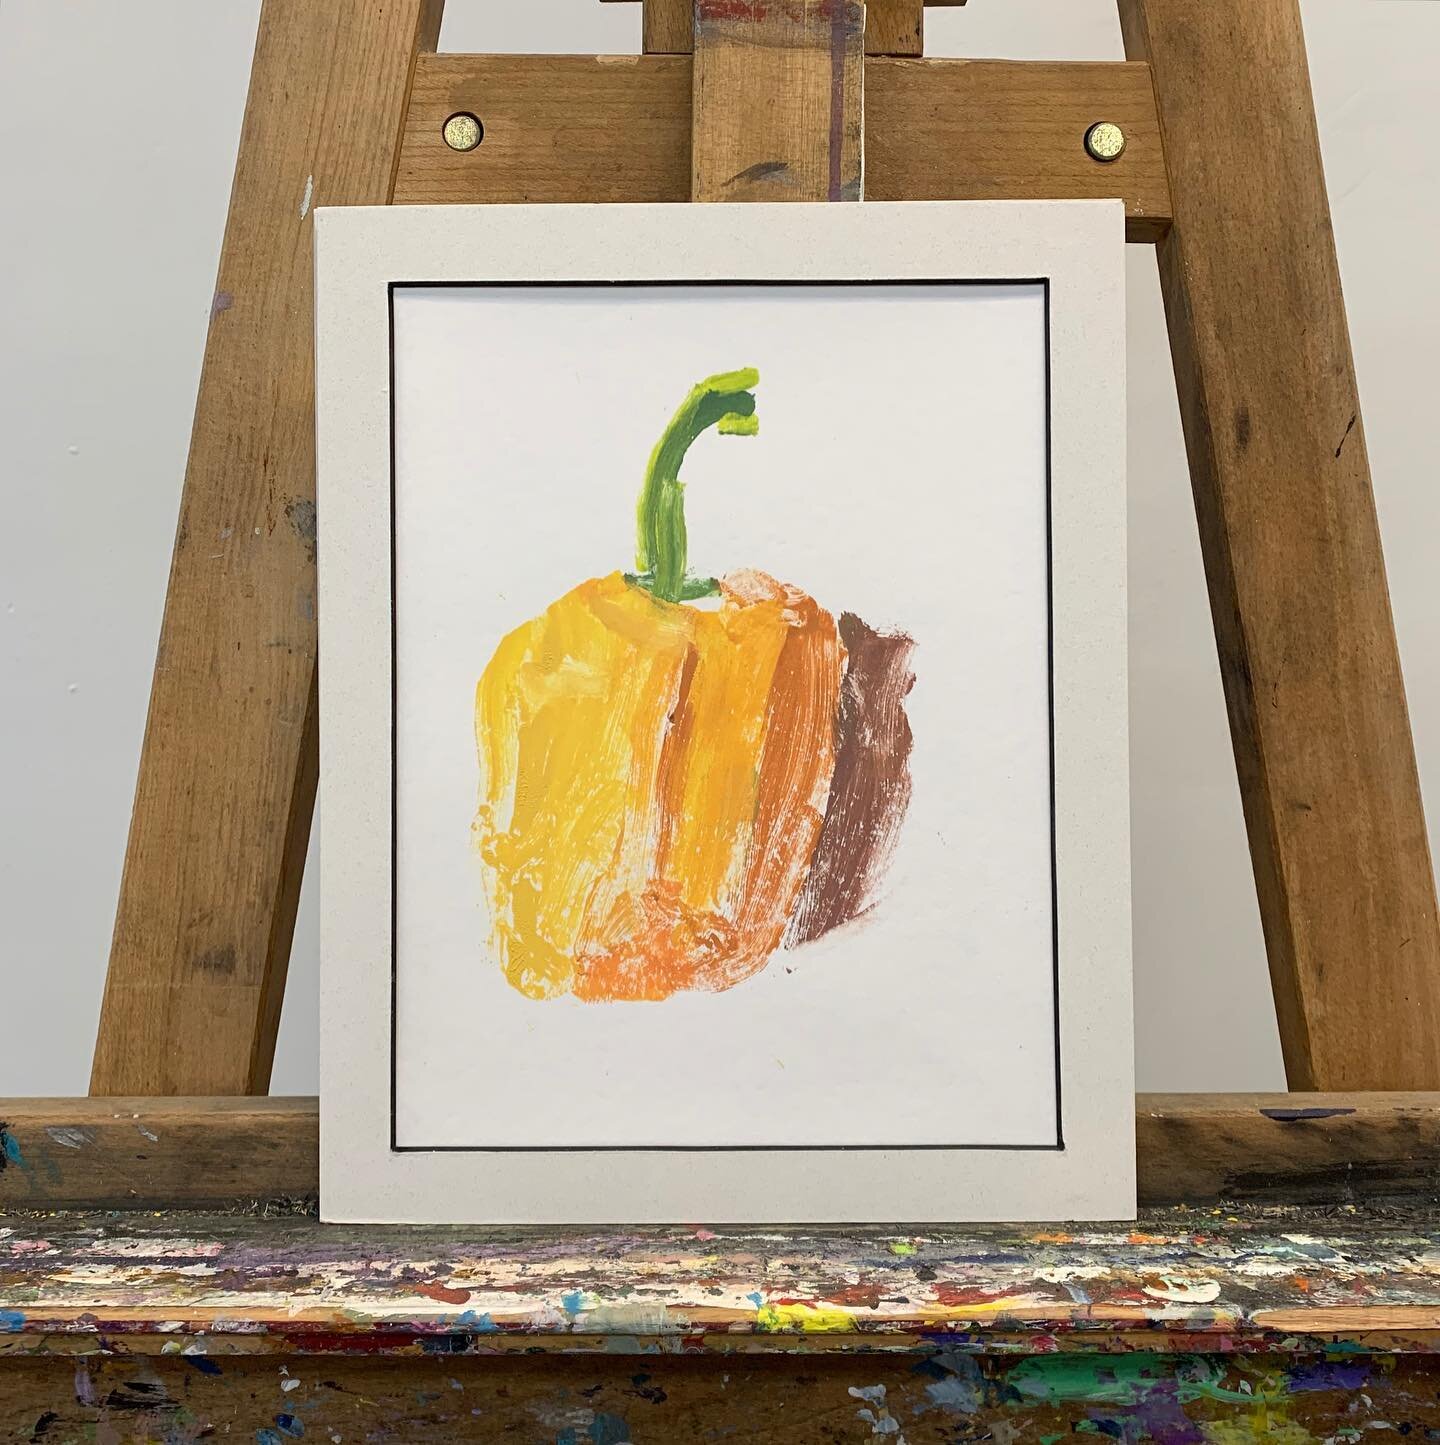 &ldquo;Pumpkin Bell Pepper&rdquo; and &ldquo;Chili Pepper Mint&rdquo; acrylic mono prints on bristol. $25 each.
&bull;
Artist Aaron has made great strides since he started our program last year! With music being his primary passion and joke telling b